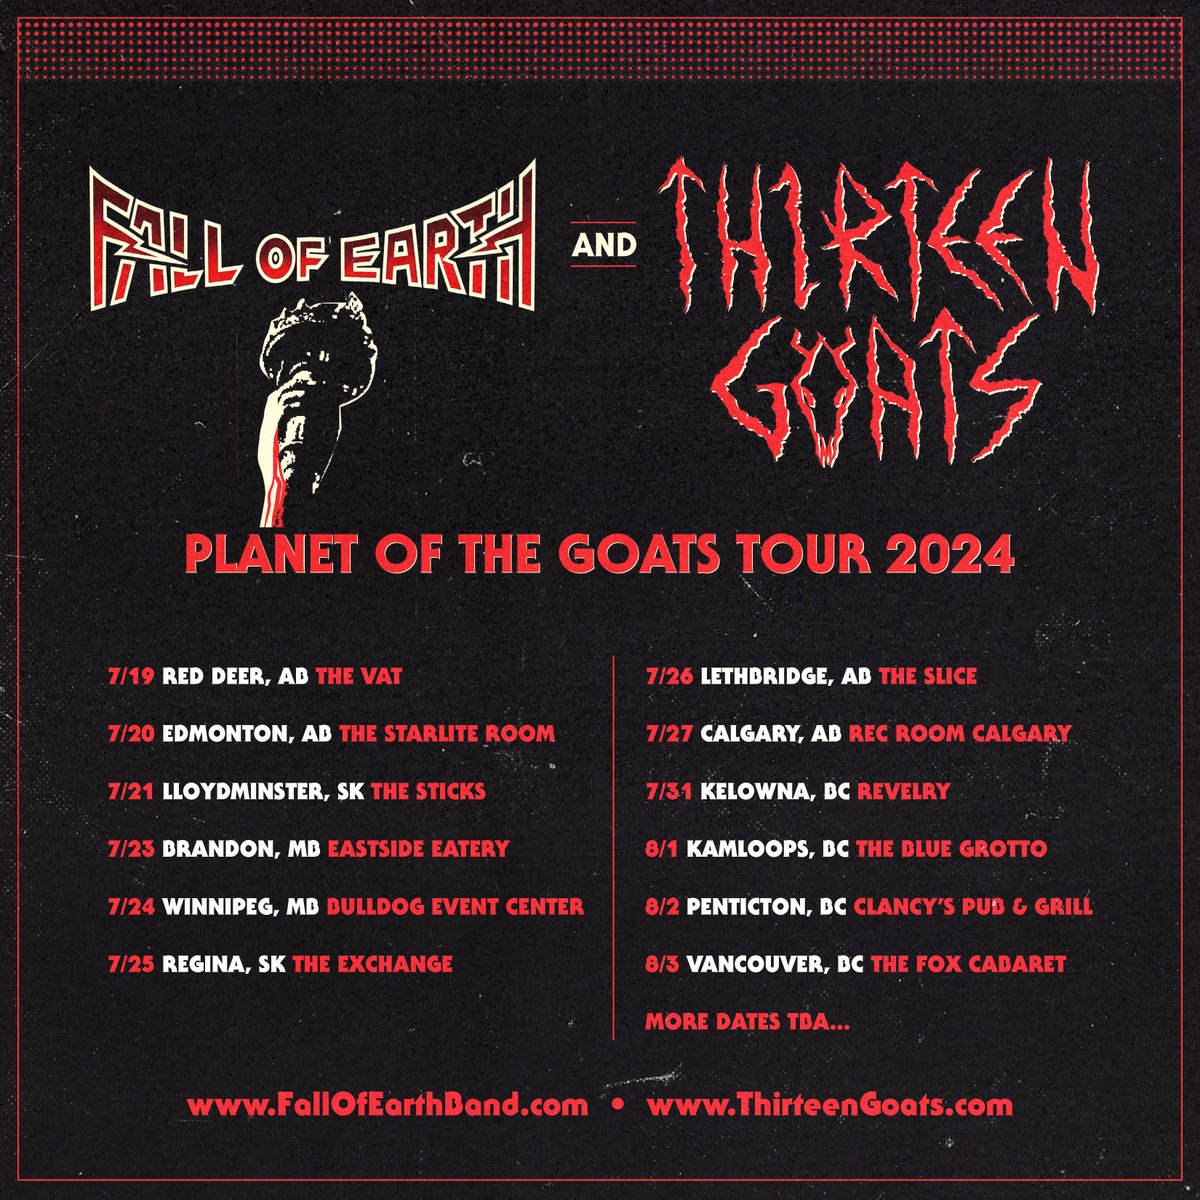 Exitus Stratagem Records - Vancouver's Thirteen Goats Announces 'Planet of the Goats Tour' w/ Fall Of Earth Info - wp.me/pciNW-lqz Album pre-order at exsrmusic.com/store/p/pre-sa… Lyric Video - “A Wolf In Shepherd’s Clothing” - youtu.be/6J5wSen7Emc